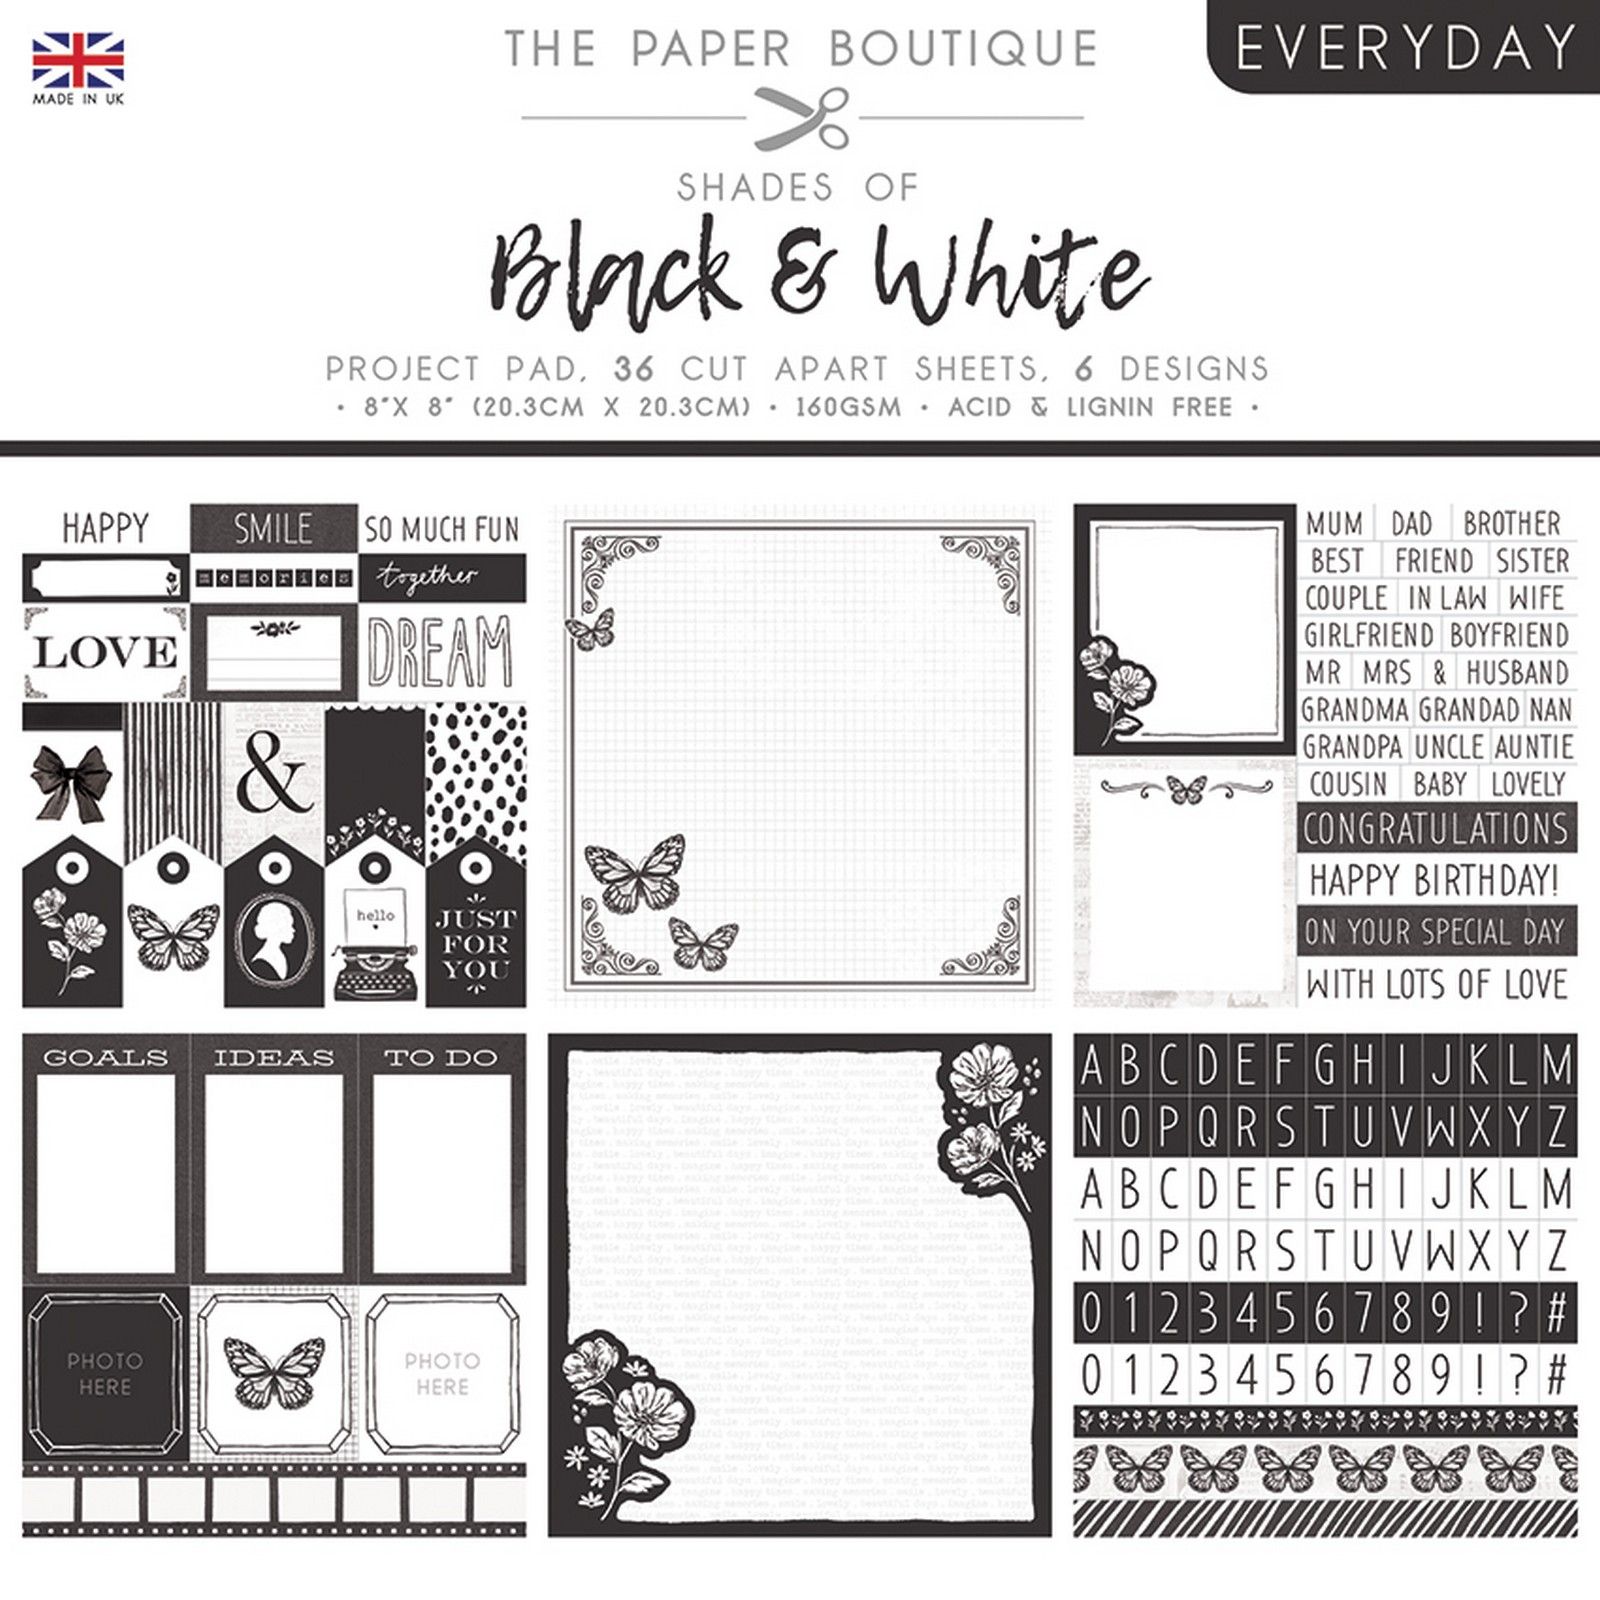 The Paper Boutique • Everyday shades of black & white project pad